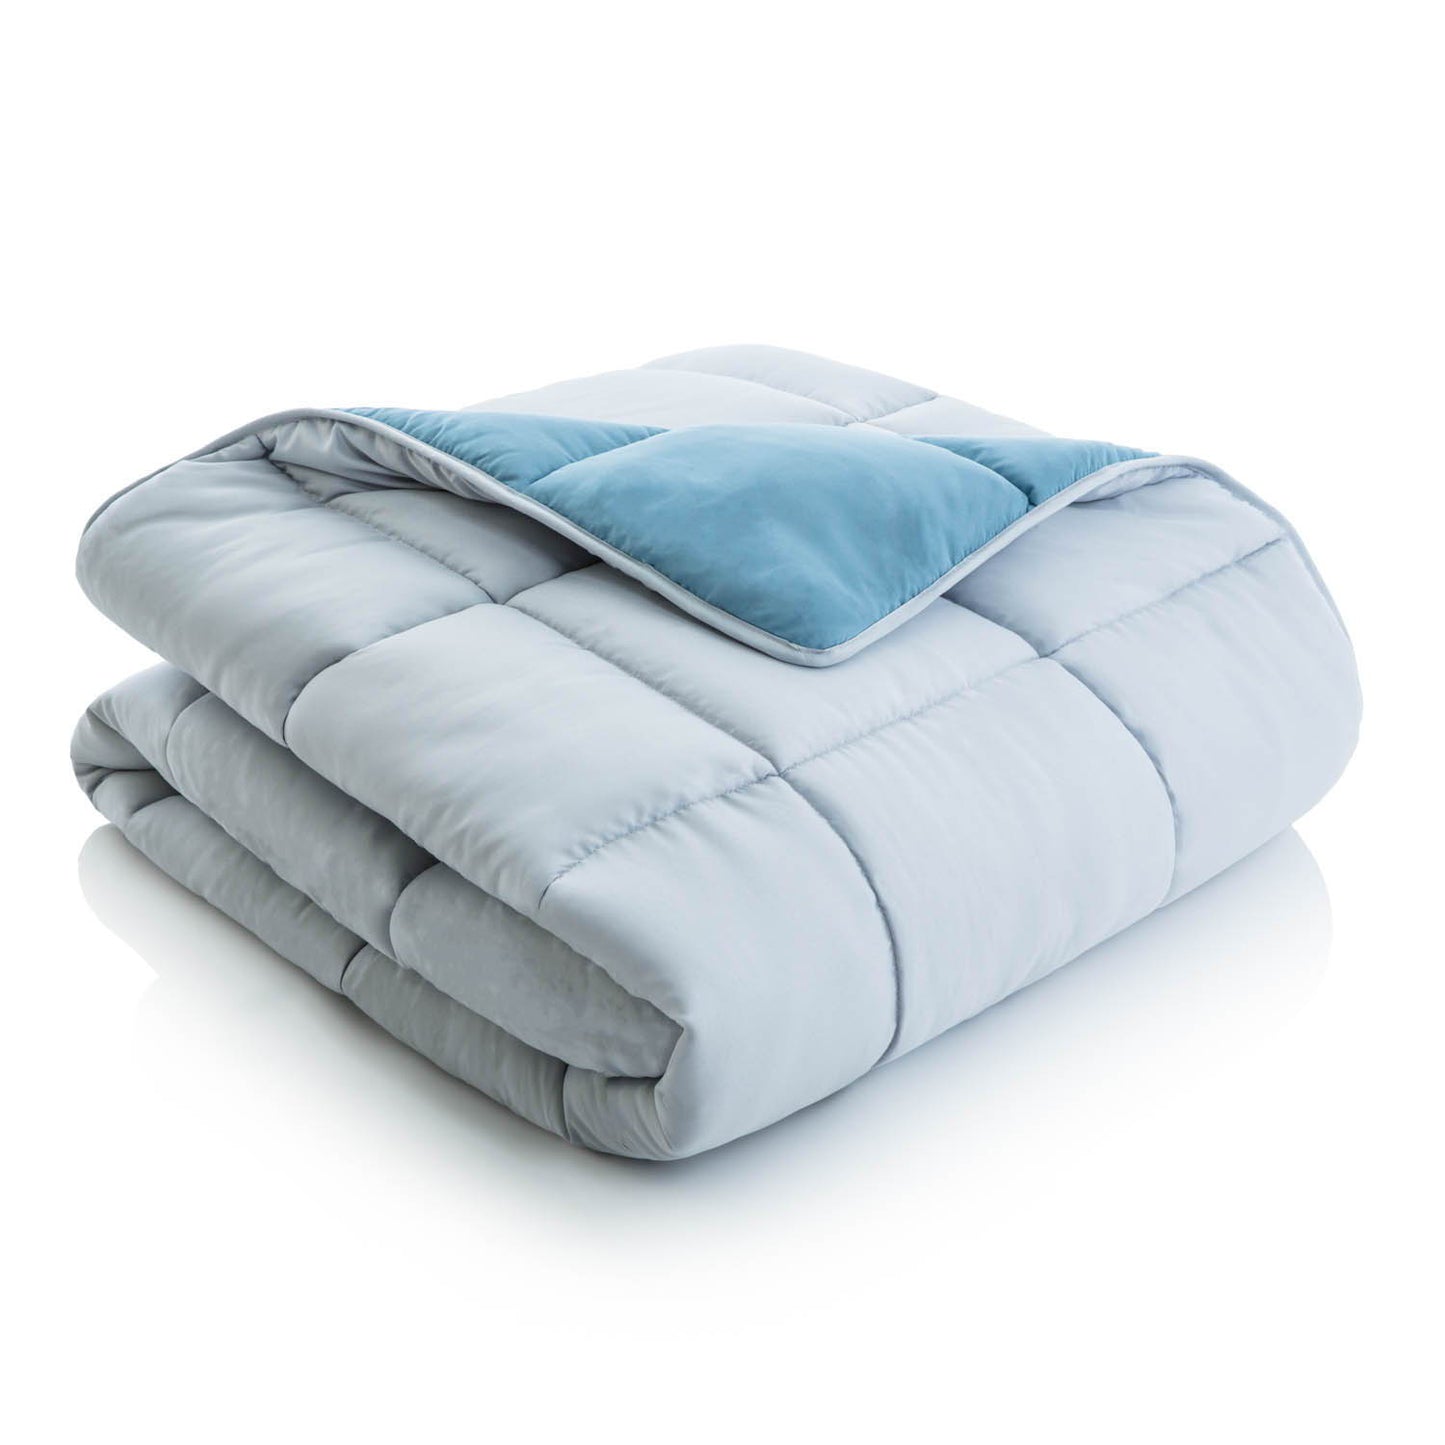 Reversible Bed In A Bag - Split Queen - White